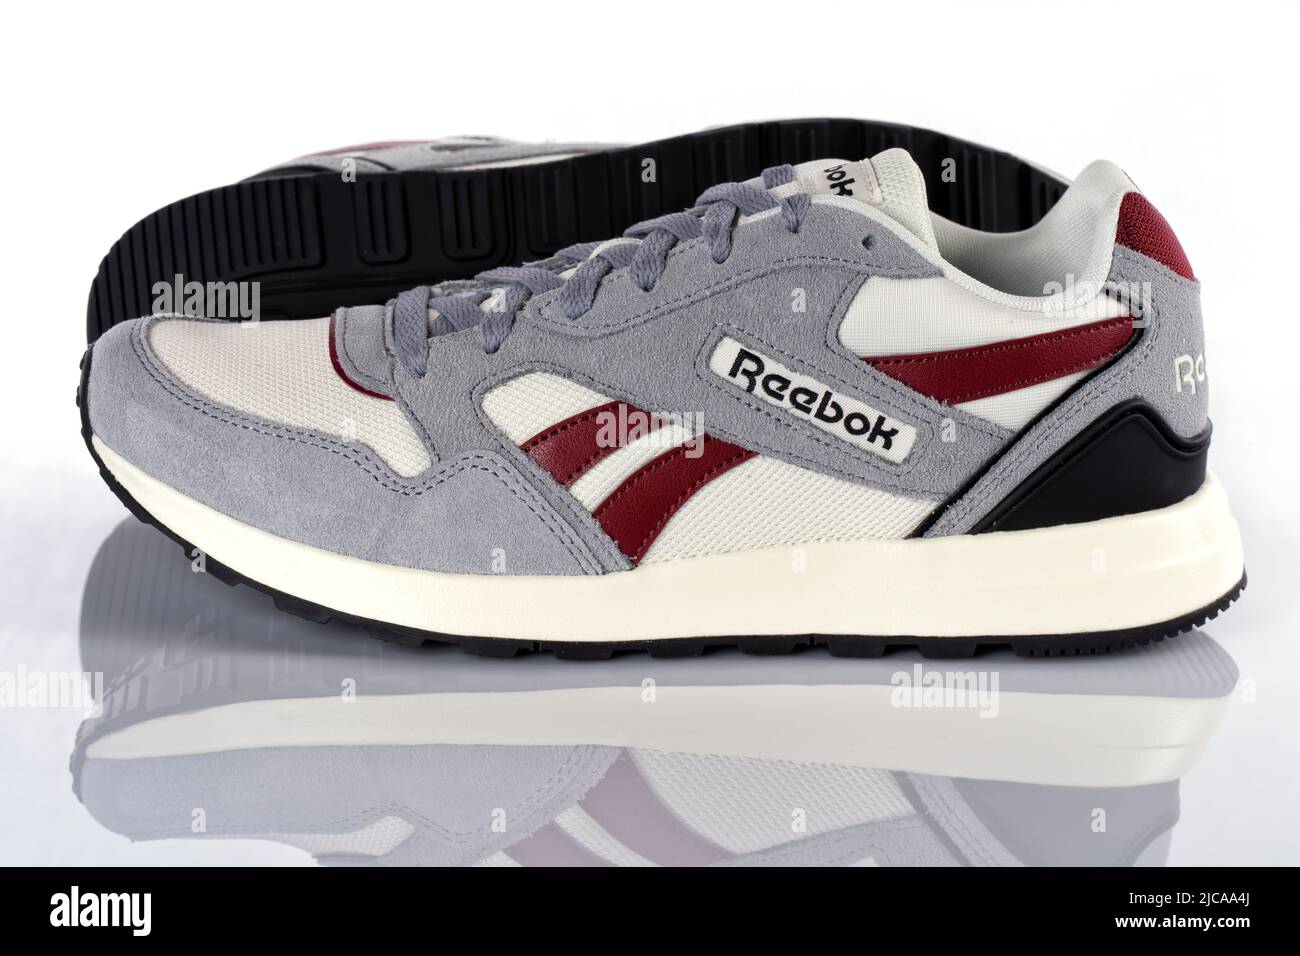 Reebok classic stock and images - Alamy